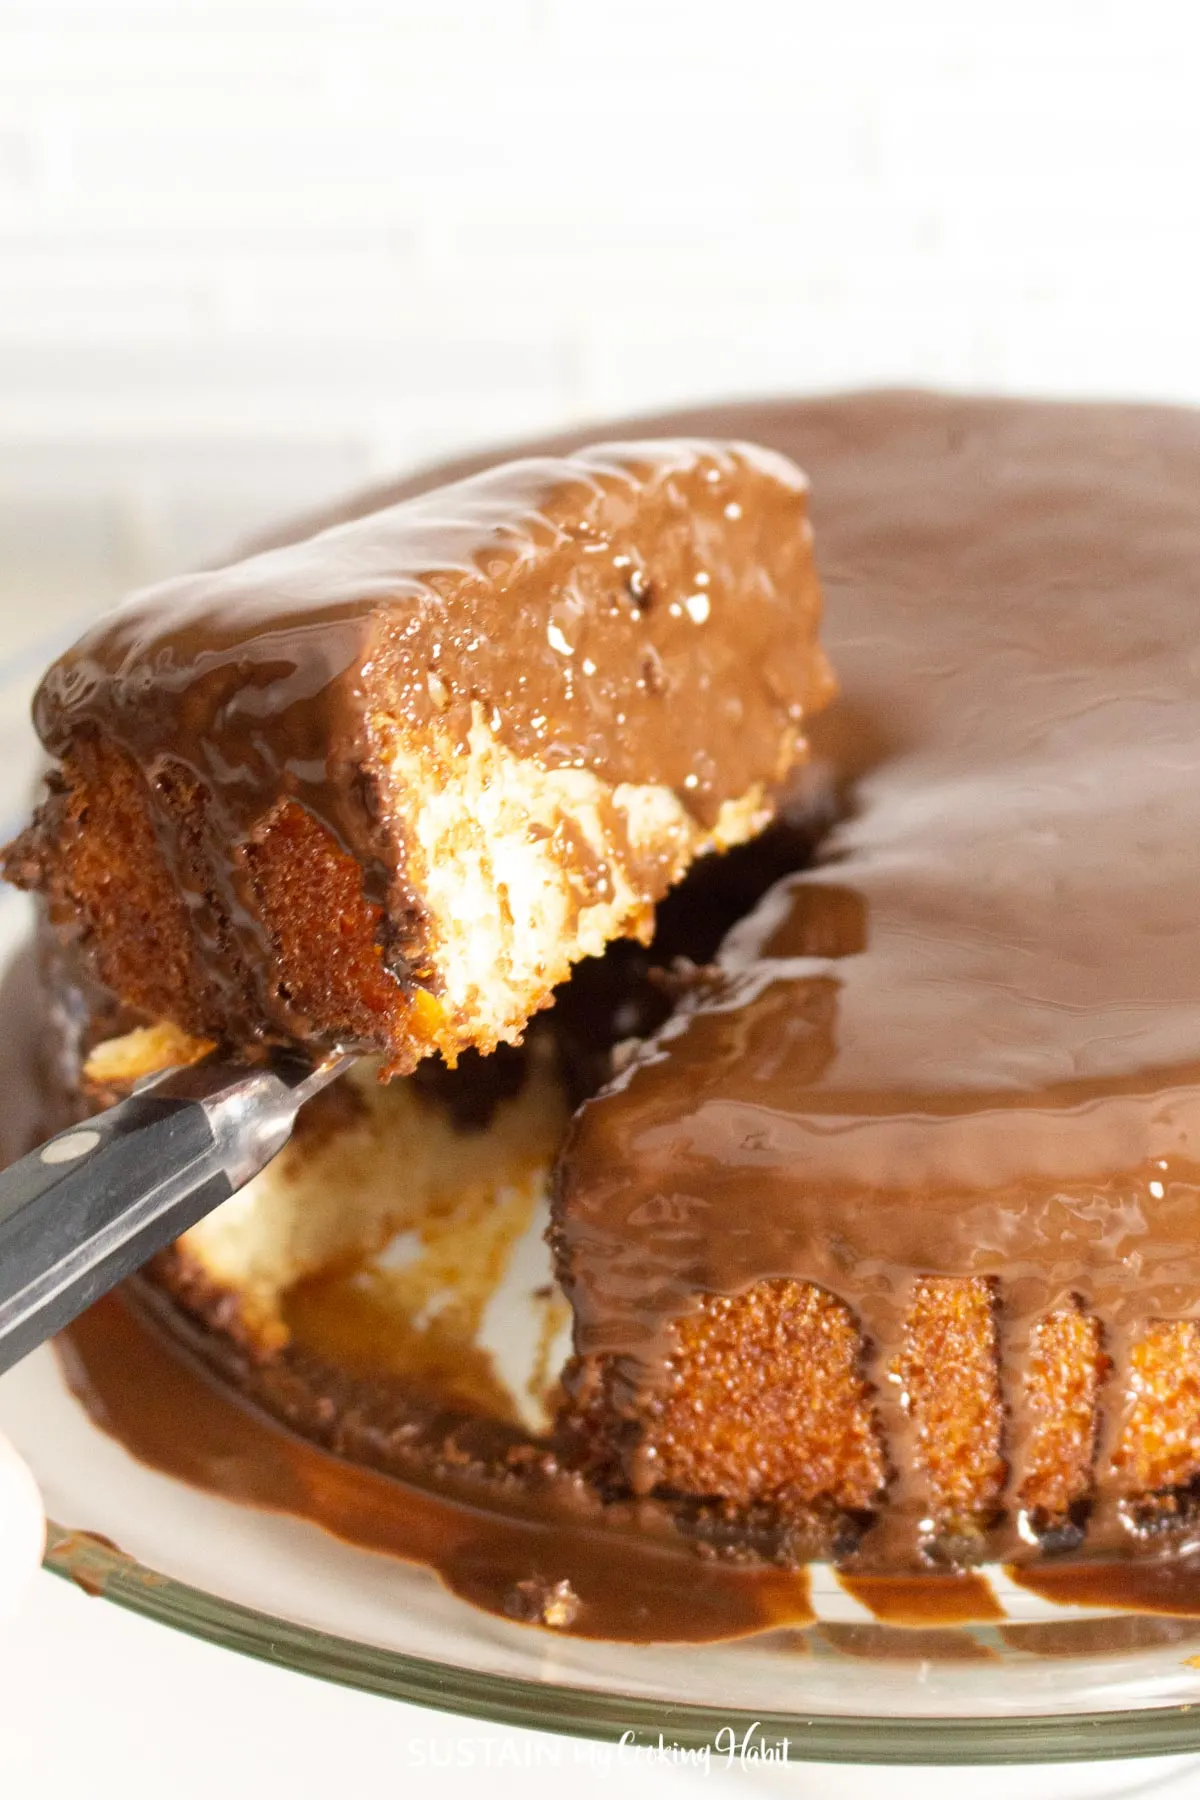 Cutting a piece of coconut cake with a chocolate glaze topping